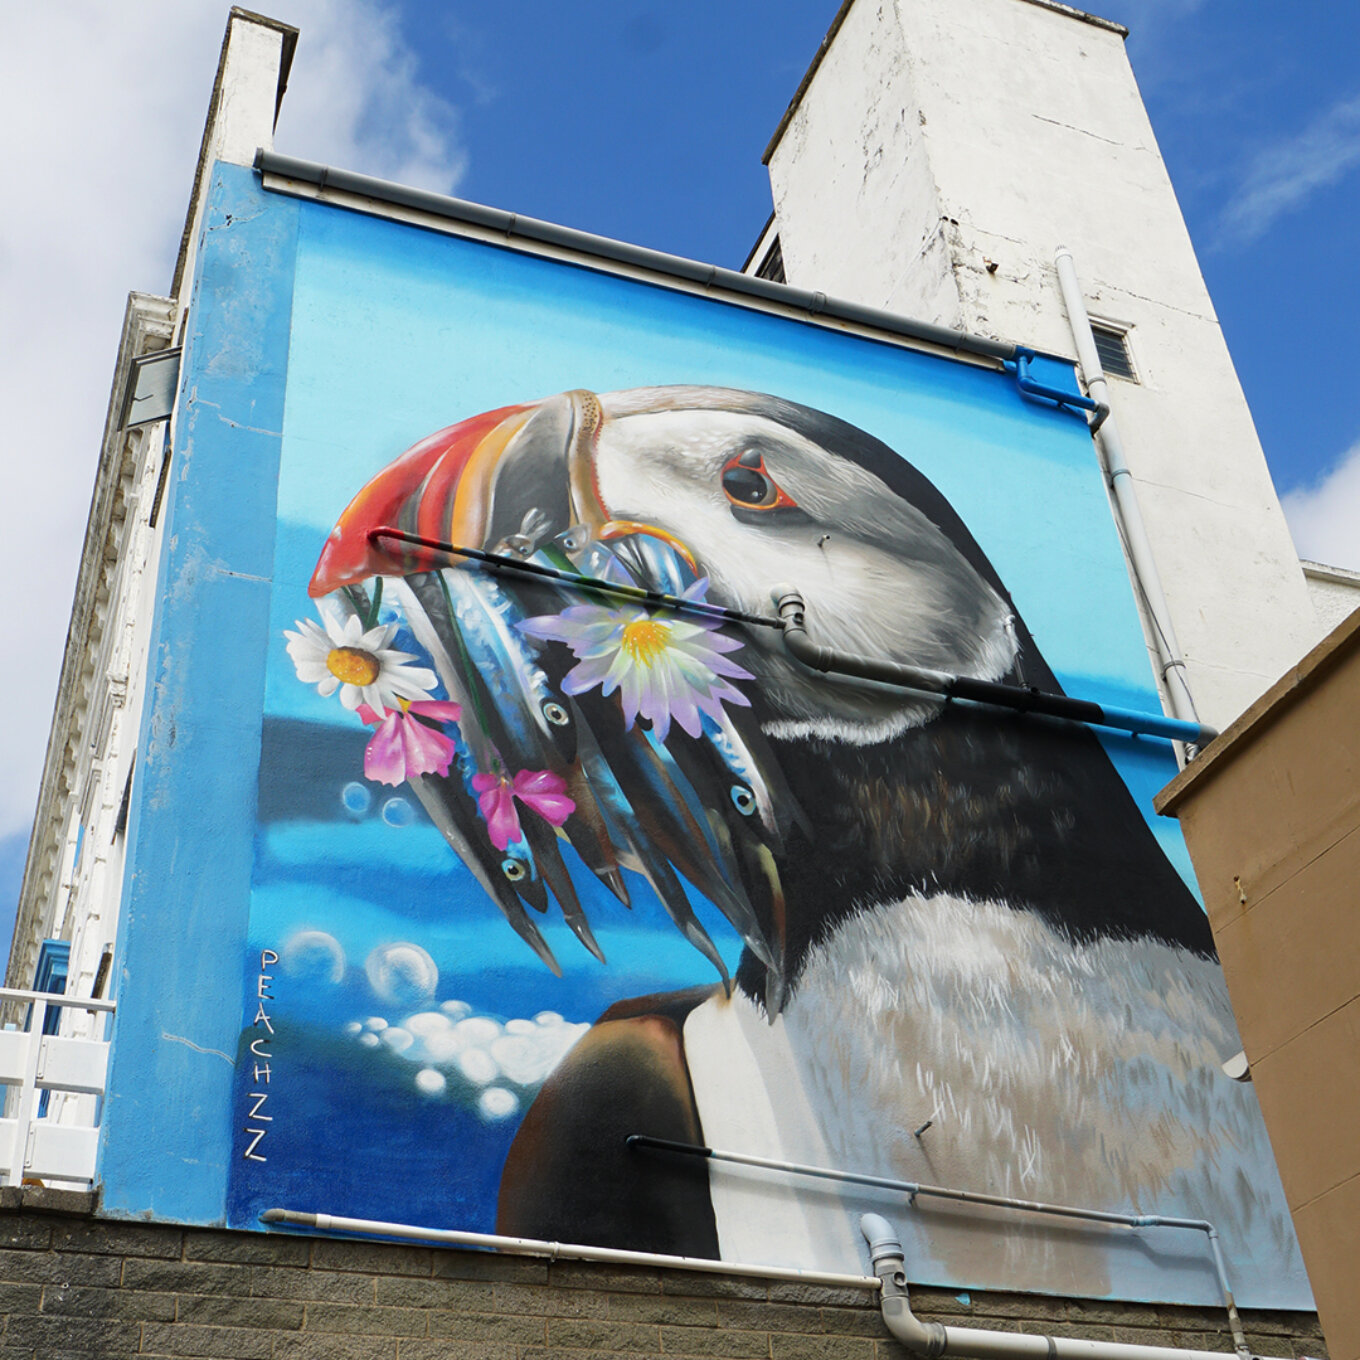 On the side of a building is painted a large puffin with fish in its mouth. The fish are adorned with flowers. The painting is bold and colourful.